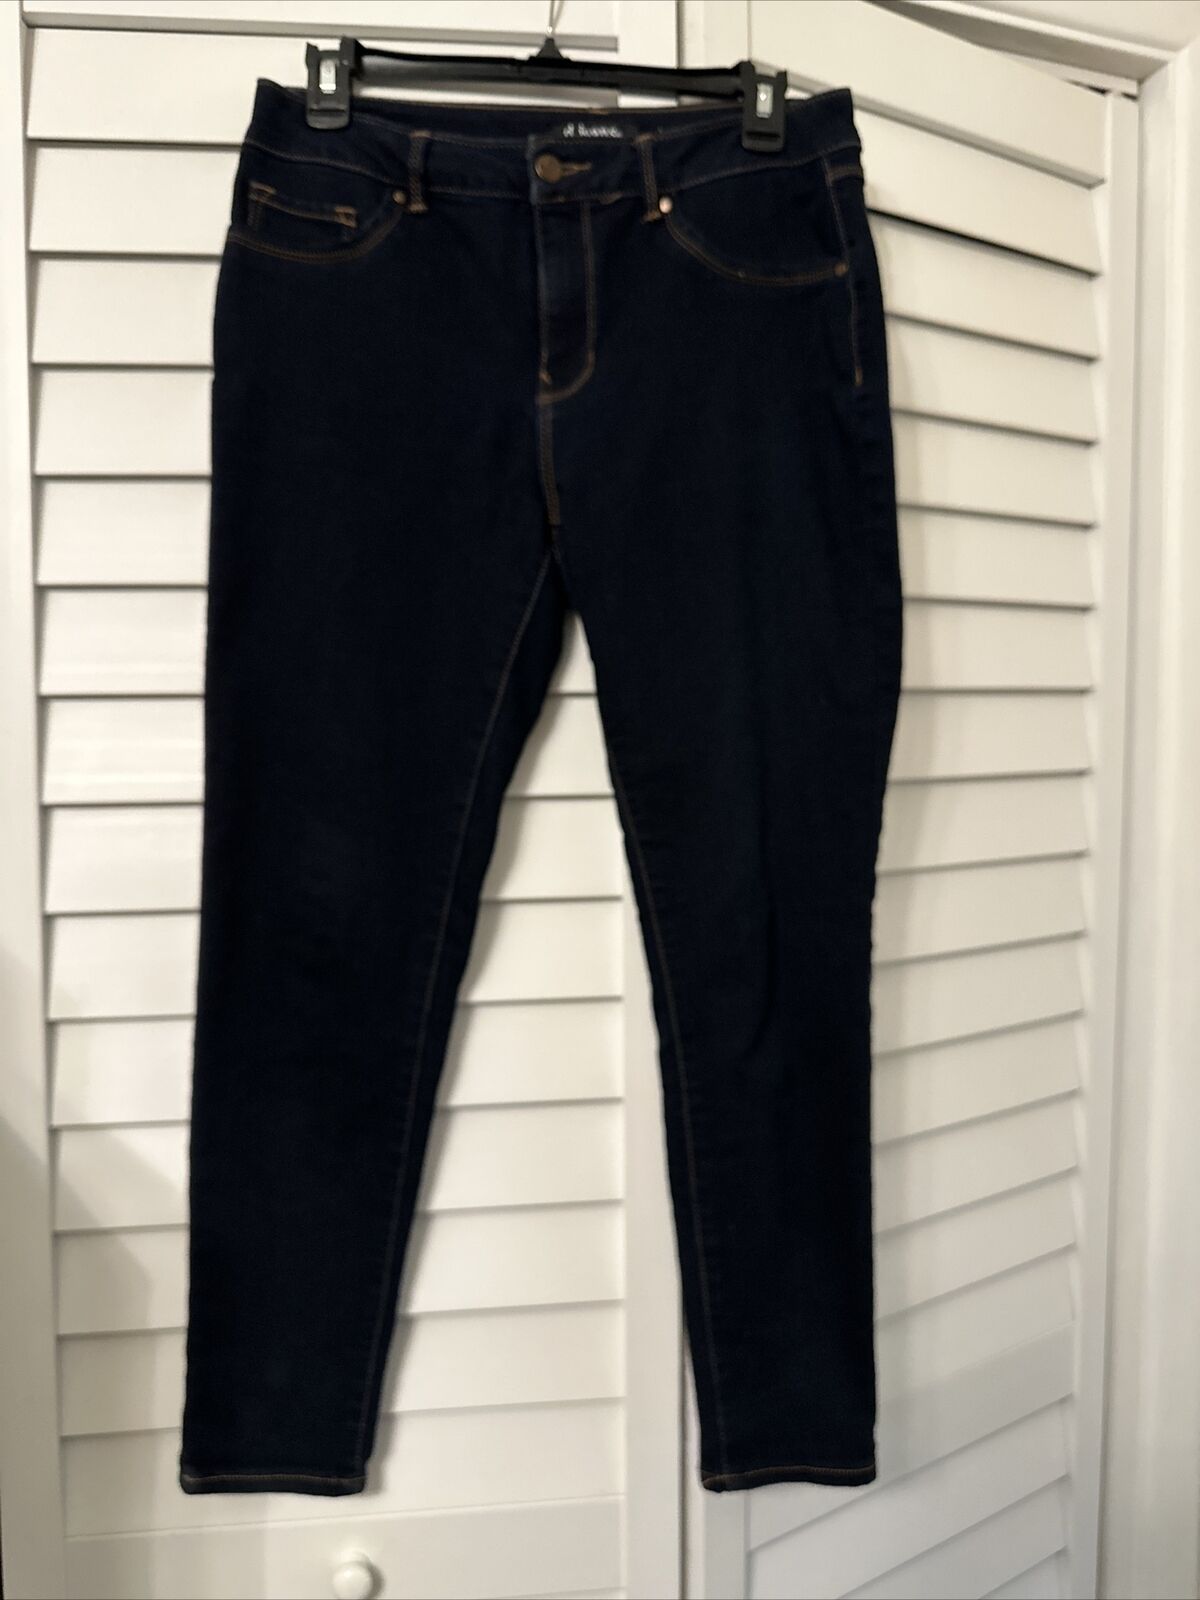 d. jeans Size 8 Dark Wash Ankle Jeans